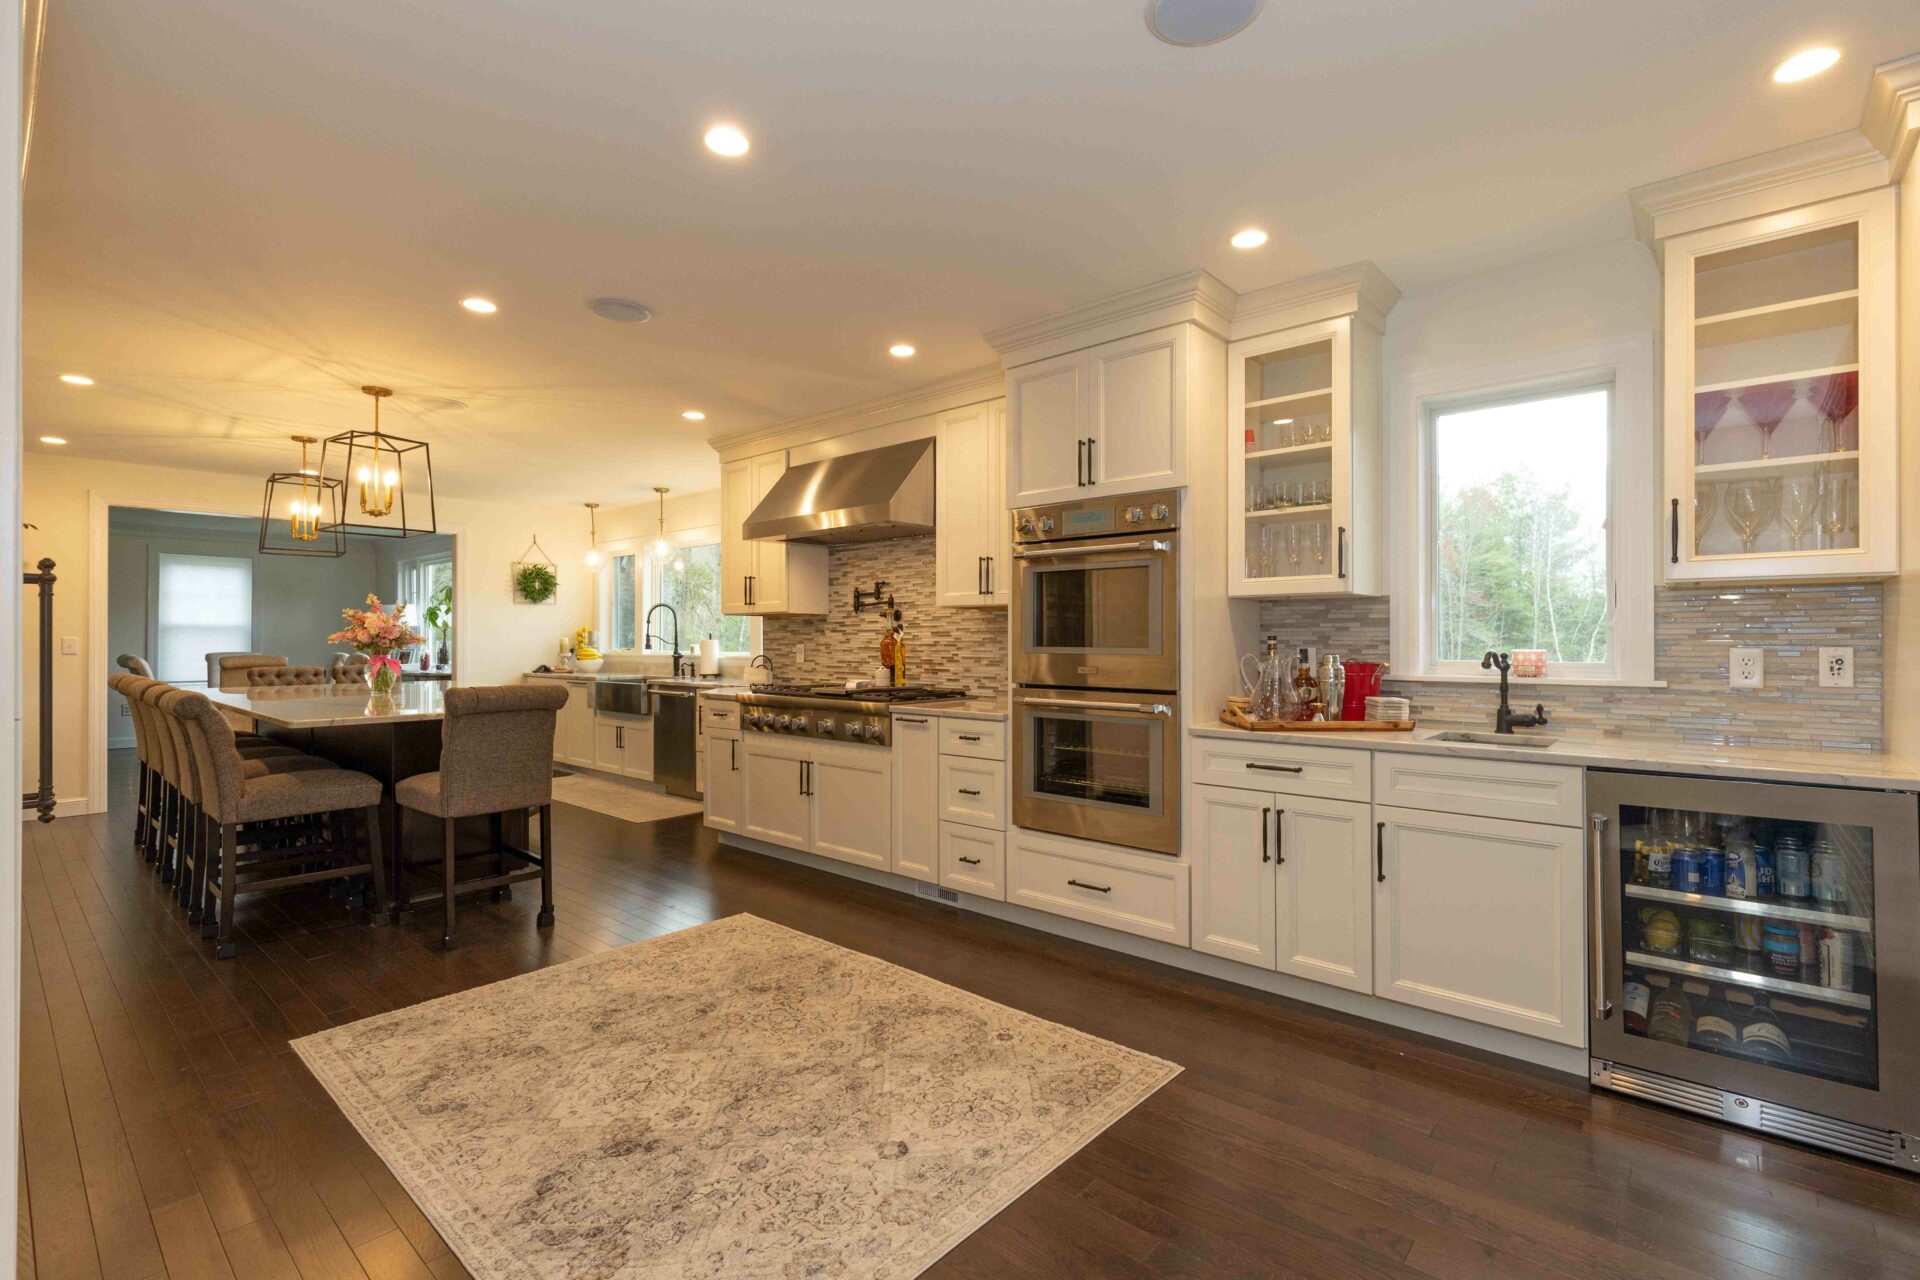 Your Guide to Hiring Kitchen Remodeling Contractors in Your Area